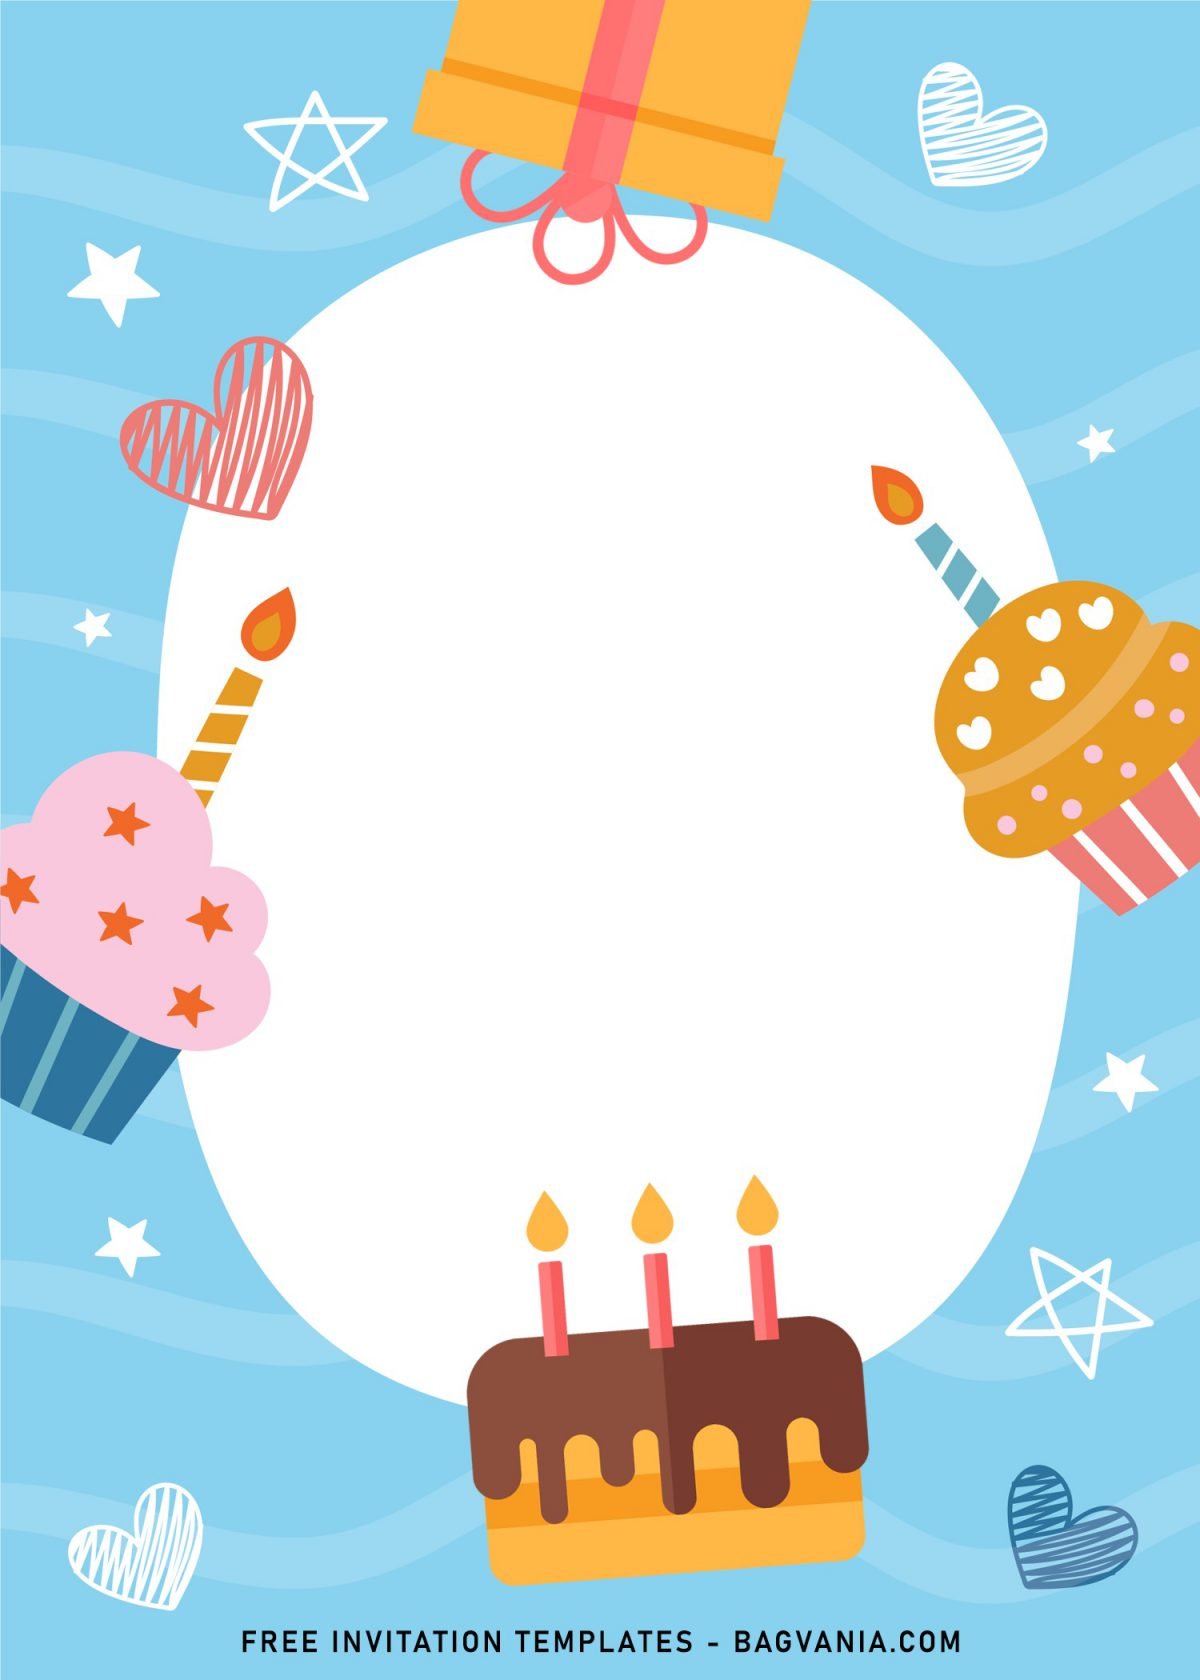 7+ Cute And Fun Birthday Invitation Templates For Kids Birthday Party and has birthday cake